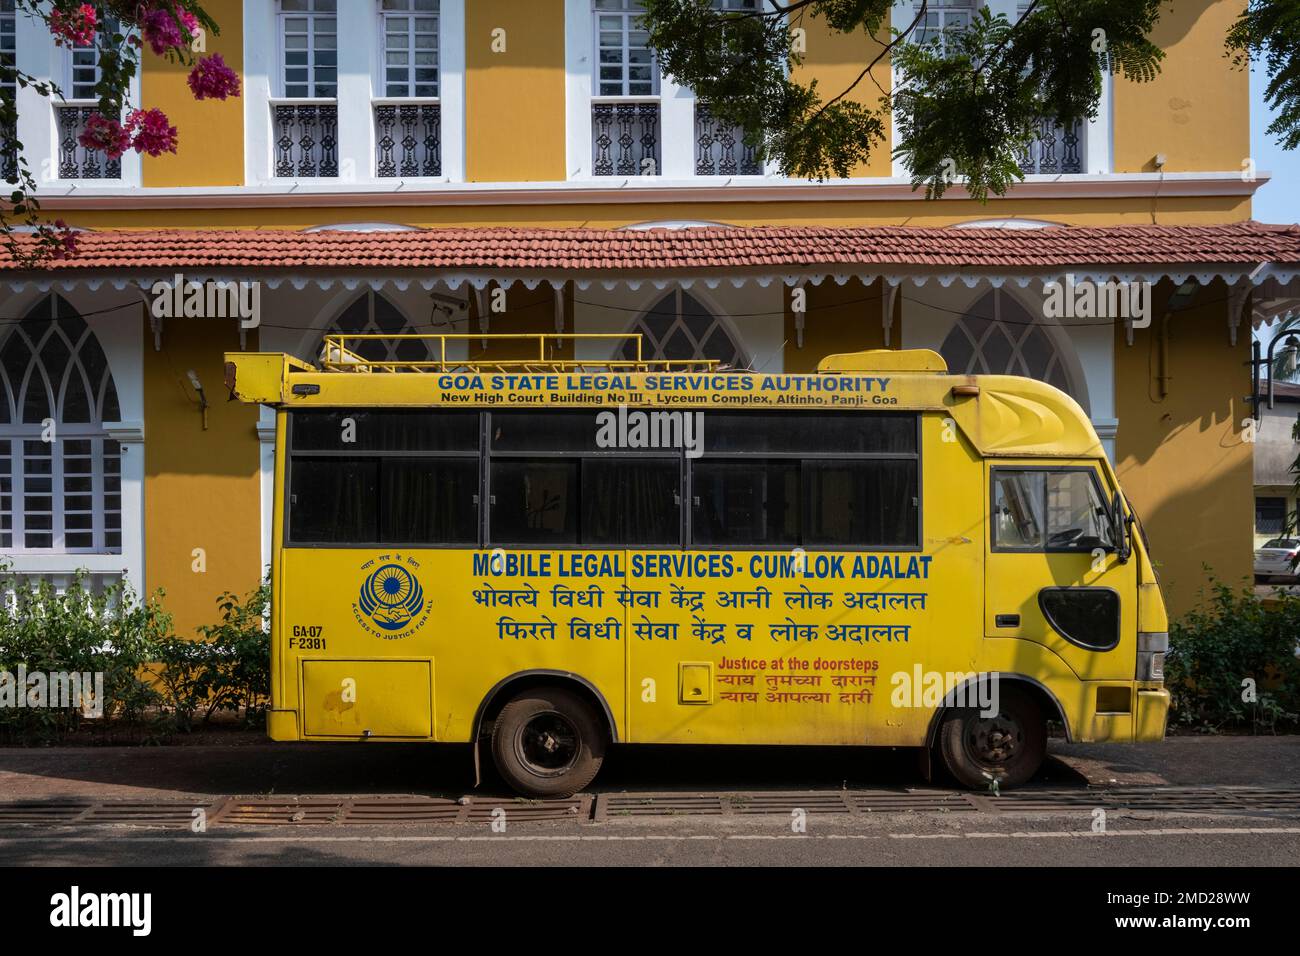 Mobile Legal Services Van outside the High Court Building, Panjim, Goa, India, Asia Stock Photo